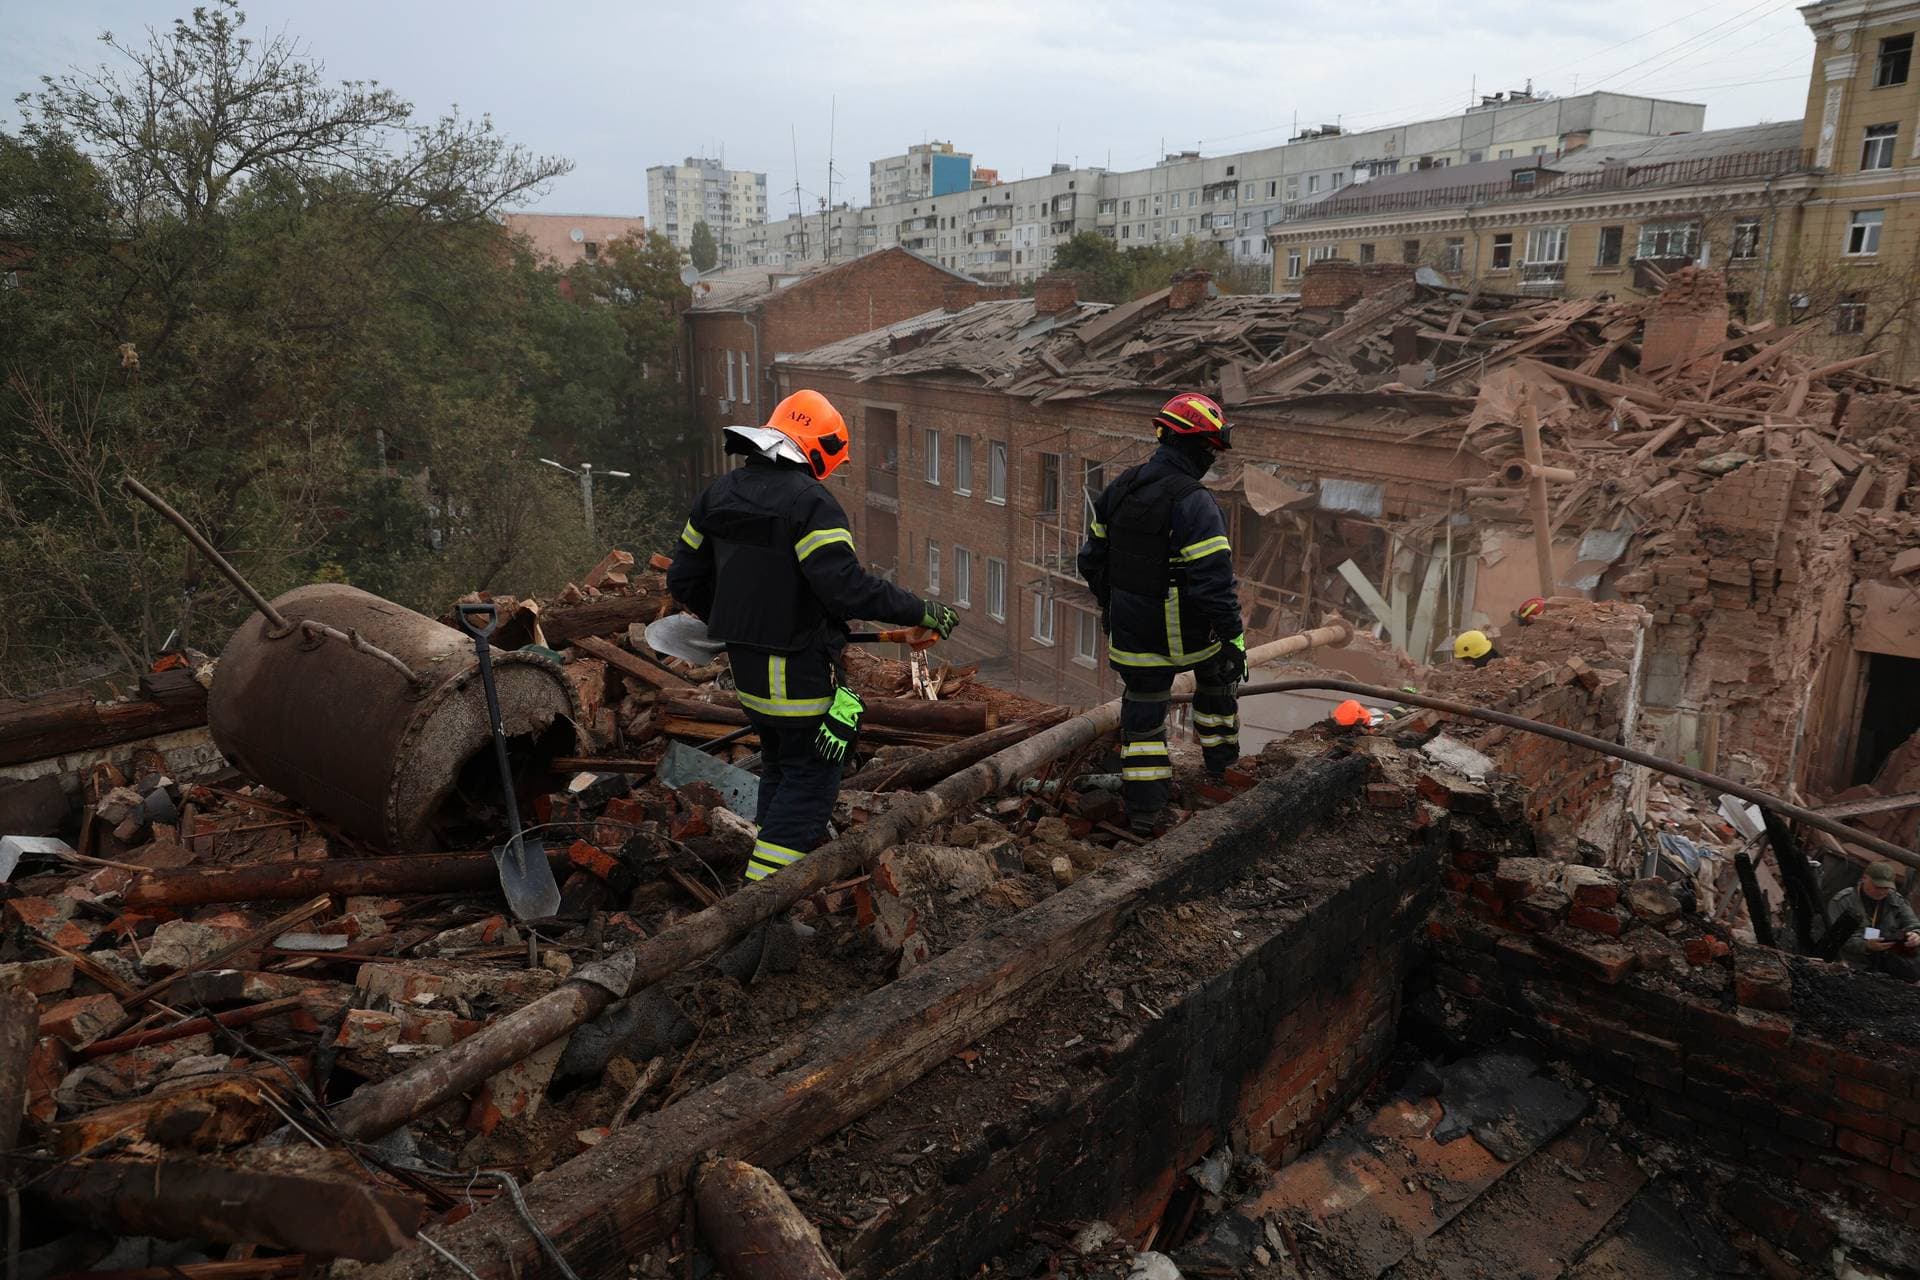 Emergency workers search for victims after a Russian air attack that damaged an apartment building in Kharkiv